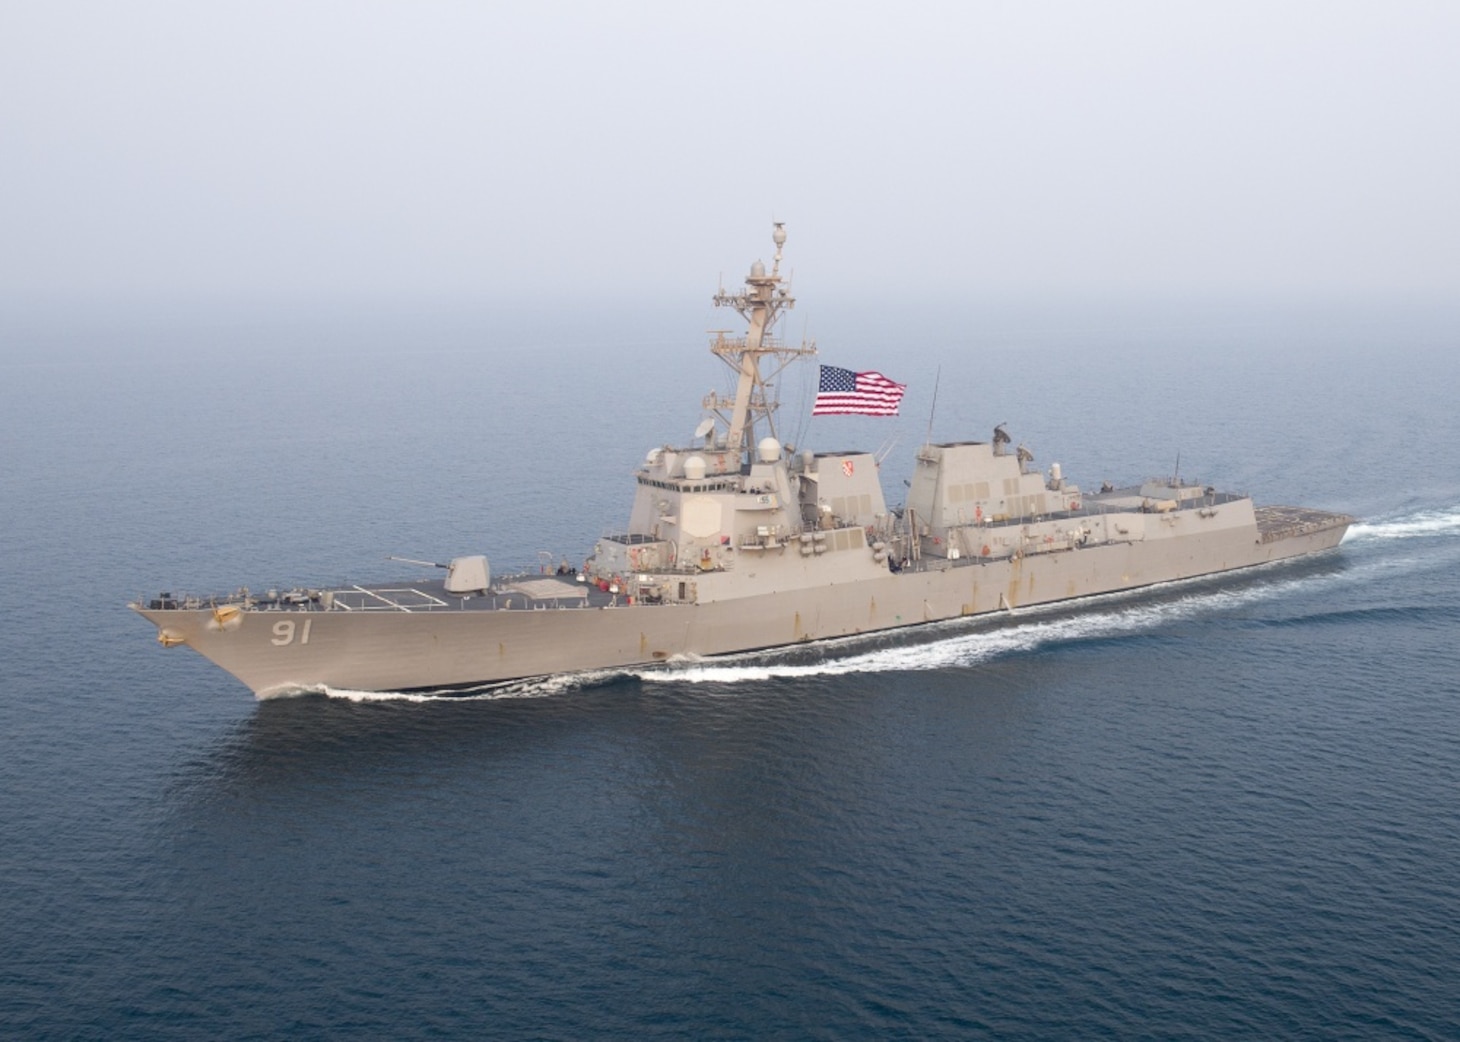 U.S. 5TH FLEET AREA OF OPERATIONS (Sept. 16, 2017) The Arleigh Burke-class guided-missile destroyer USS Pinckney (DDG 91) transits the U.S. 5th Fleet area of operations in support of maritime security operations designed to reassure allies and partners, and preserve the freedom of navigation and the free flow of commerce in the region.